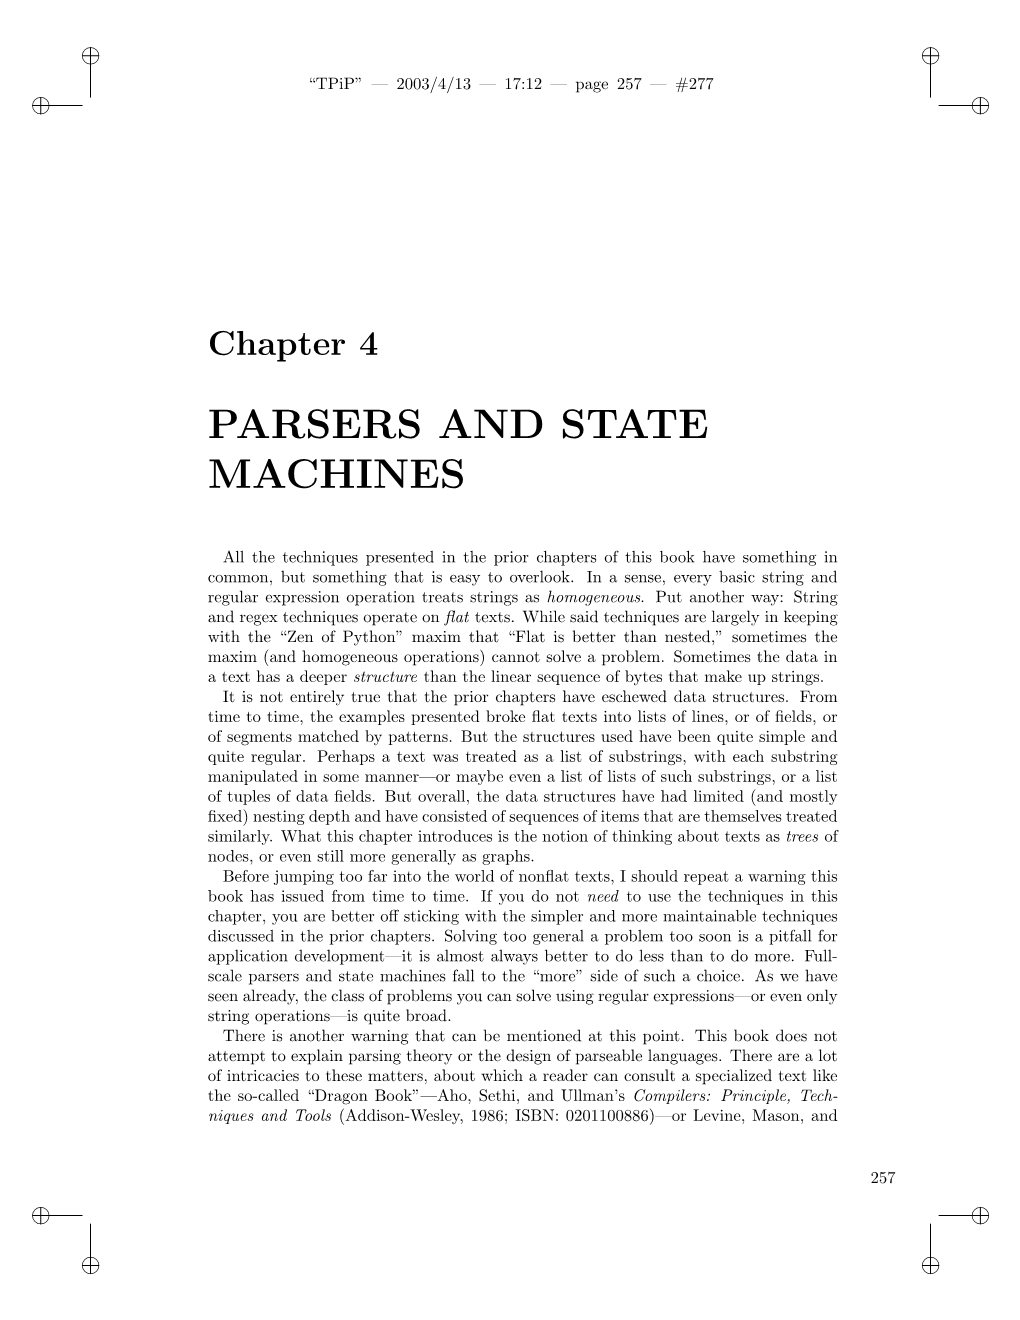 Parsers and State Machines